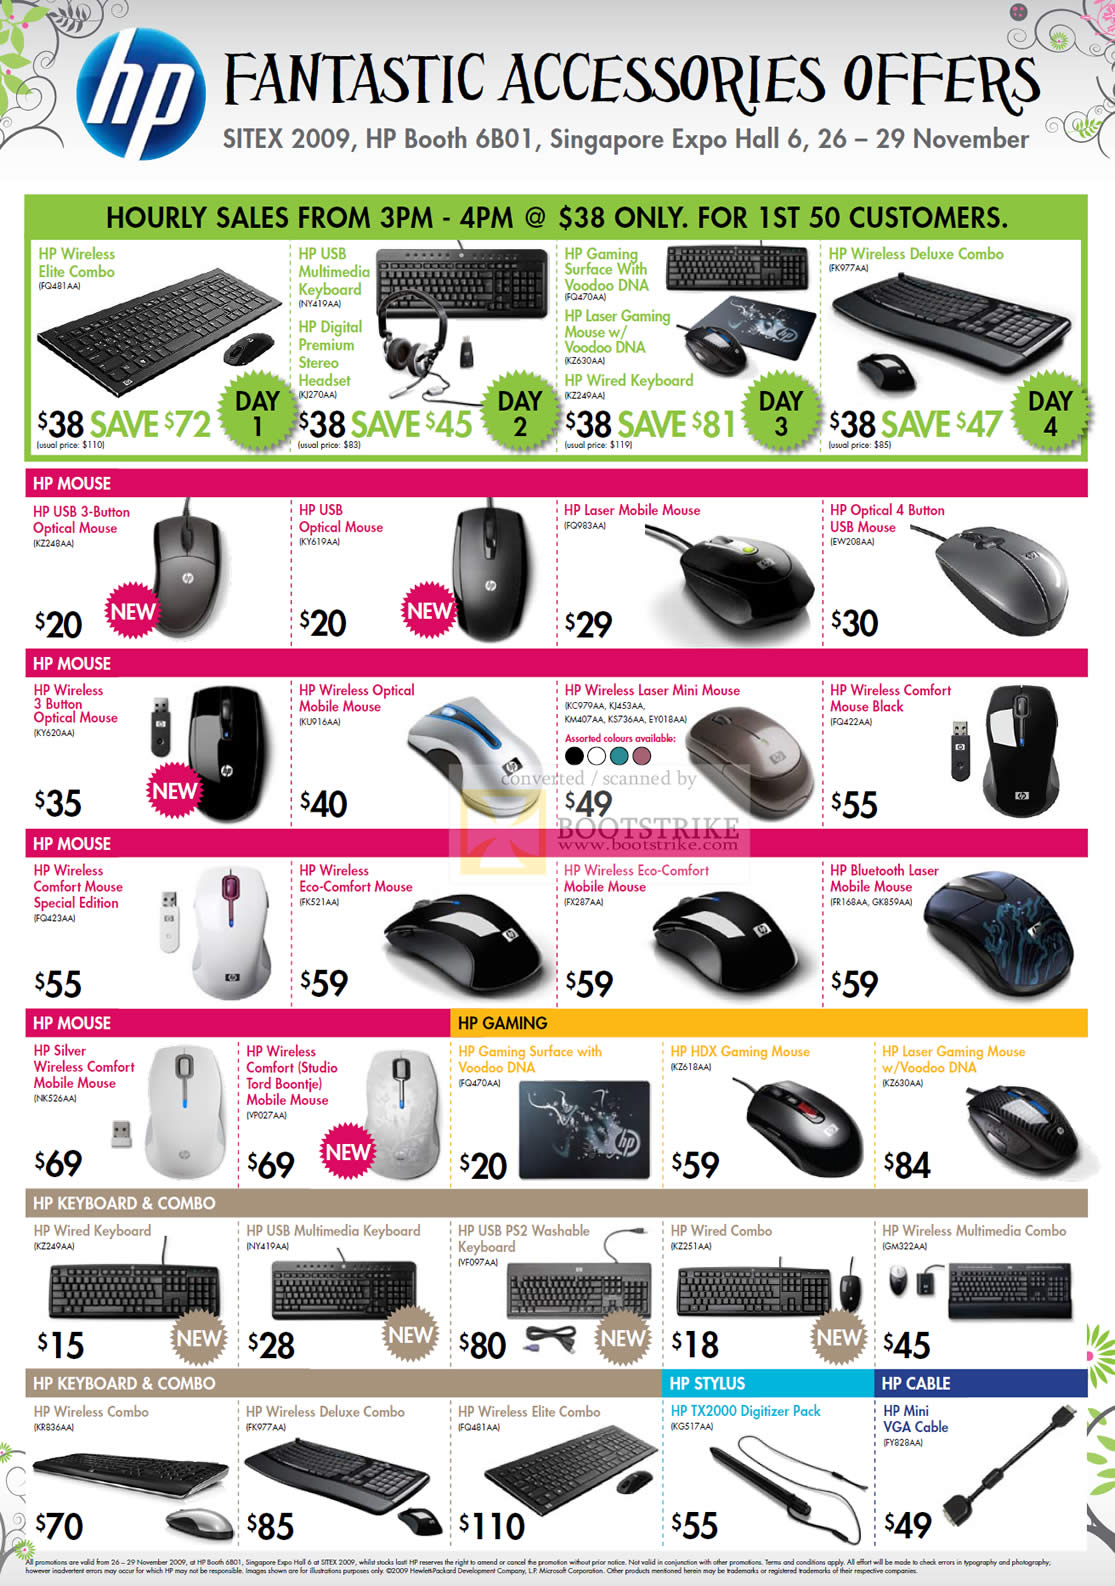 Sitex 2009 price list image brochure of HP Accessories Keyboard Wireless Elite Gaming Mouse Laser Deluxe Stylus Cable